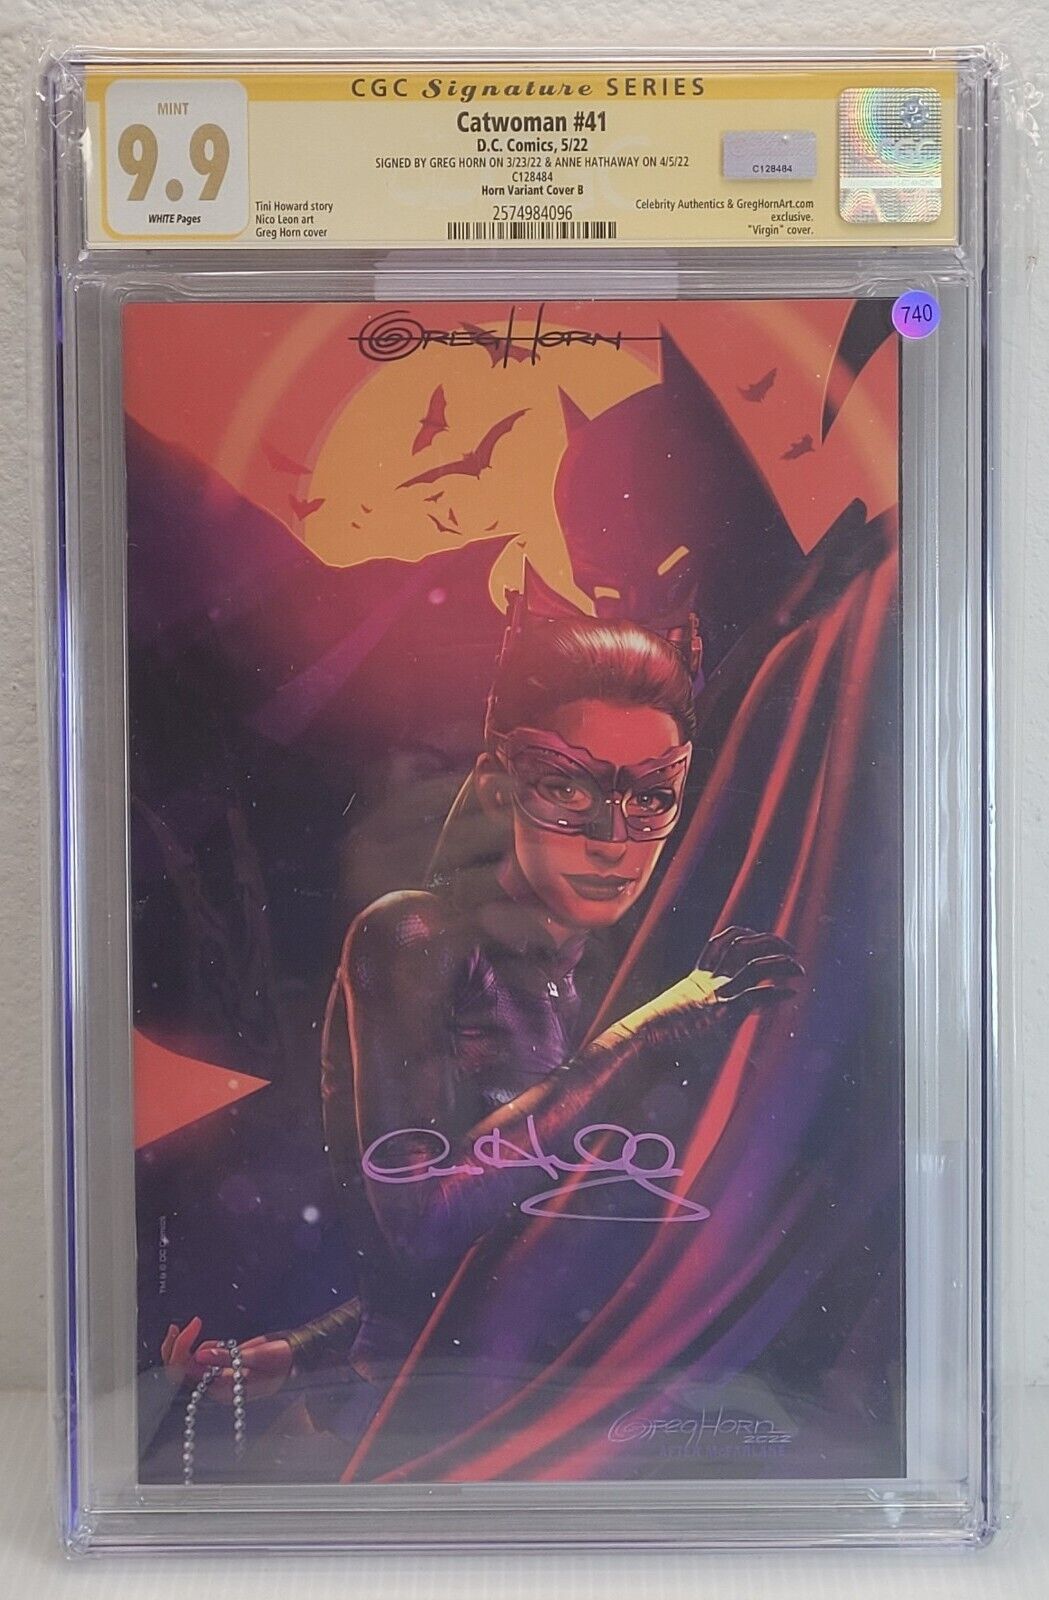 Catwoman #41 Signed Anne Hathaway Greg Horn DC Comics Horn Var Cover B CGC 9.9 